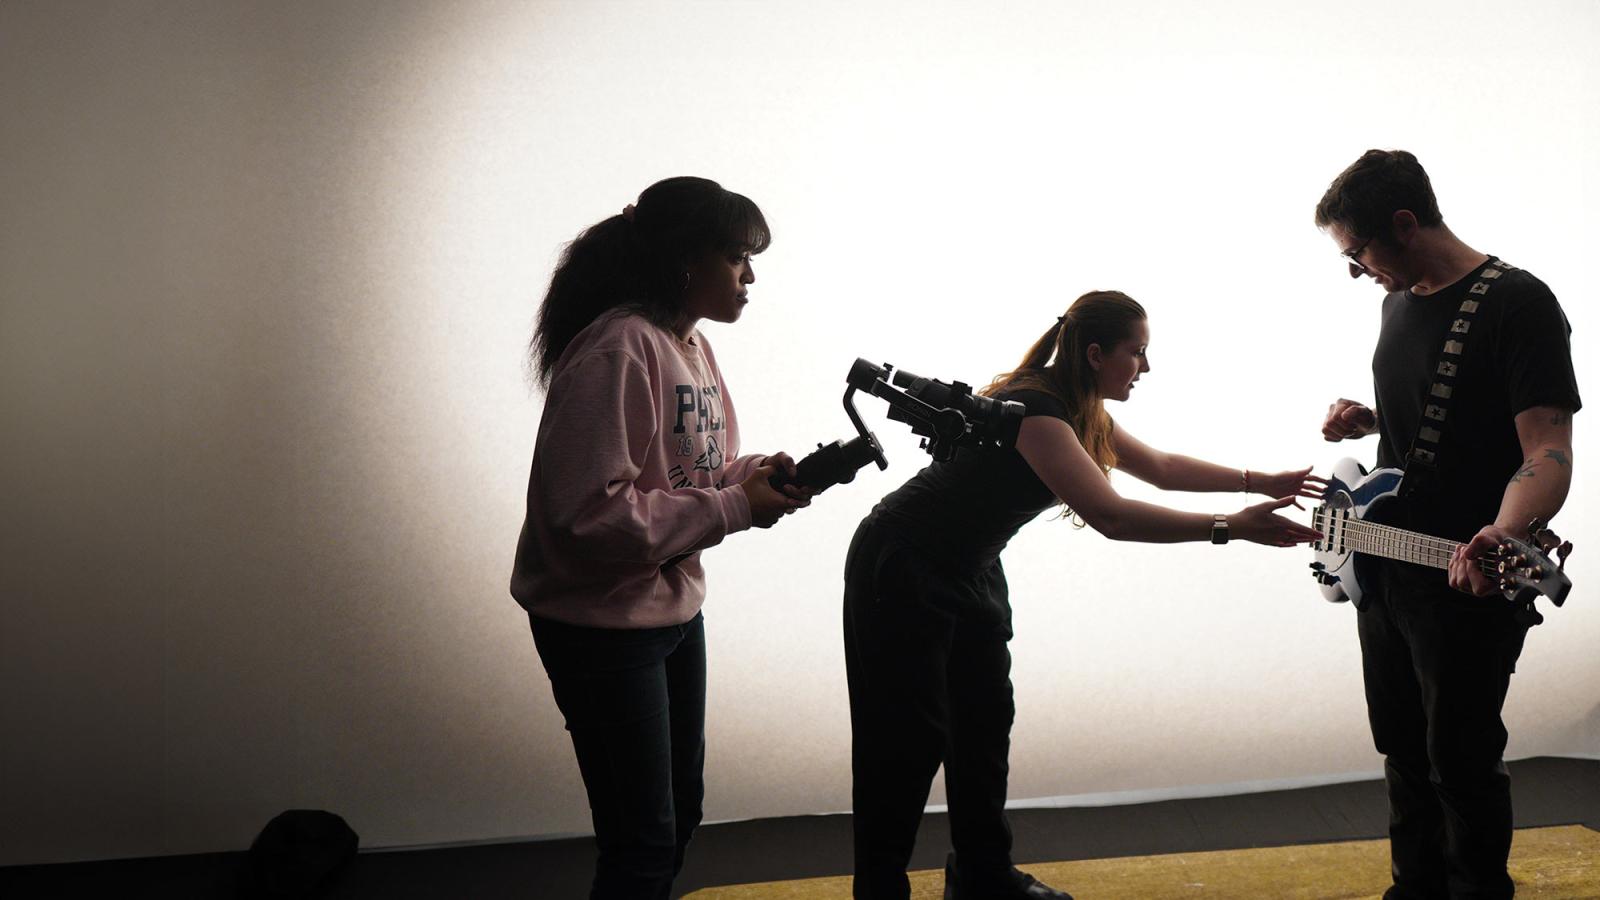 Pace University's Media, Communications, and Visual Arts students filming a music video